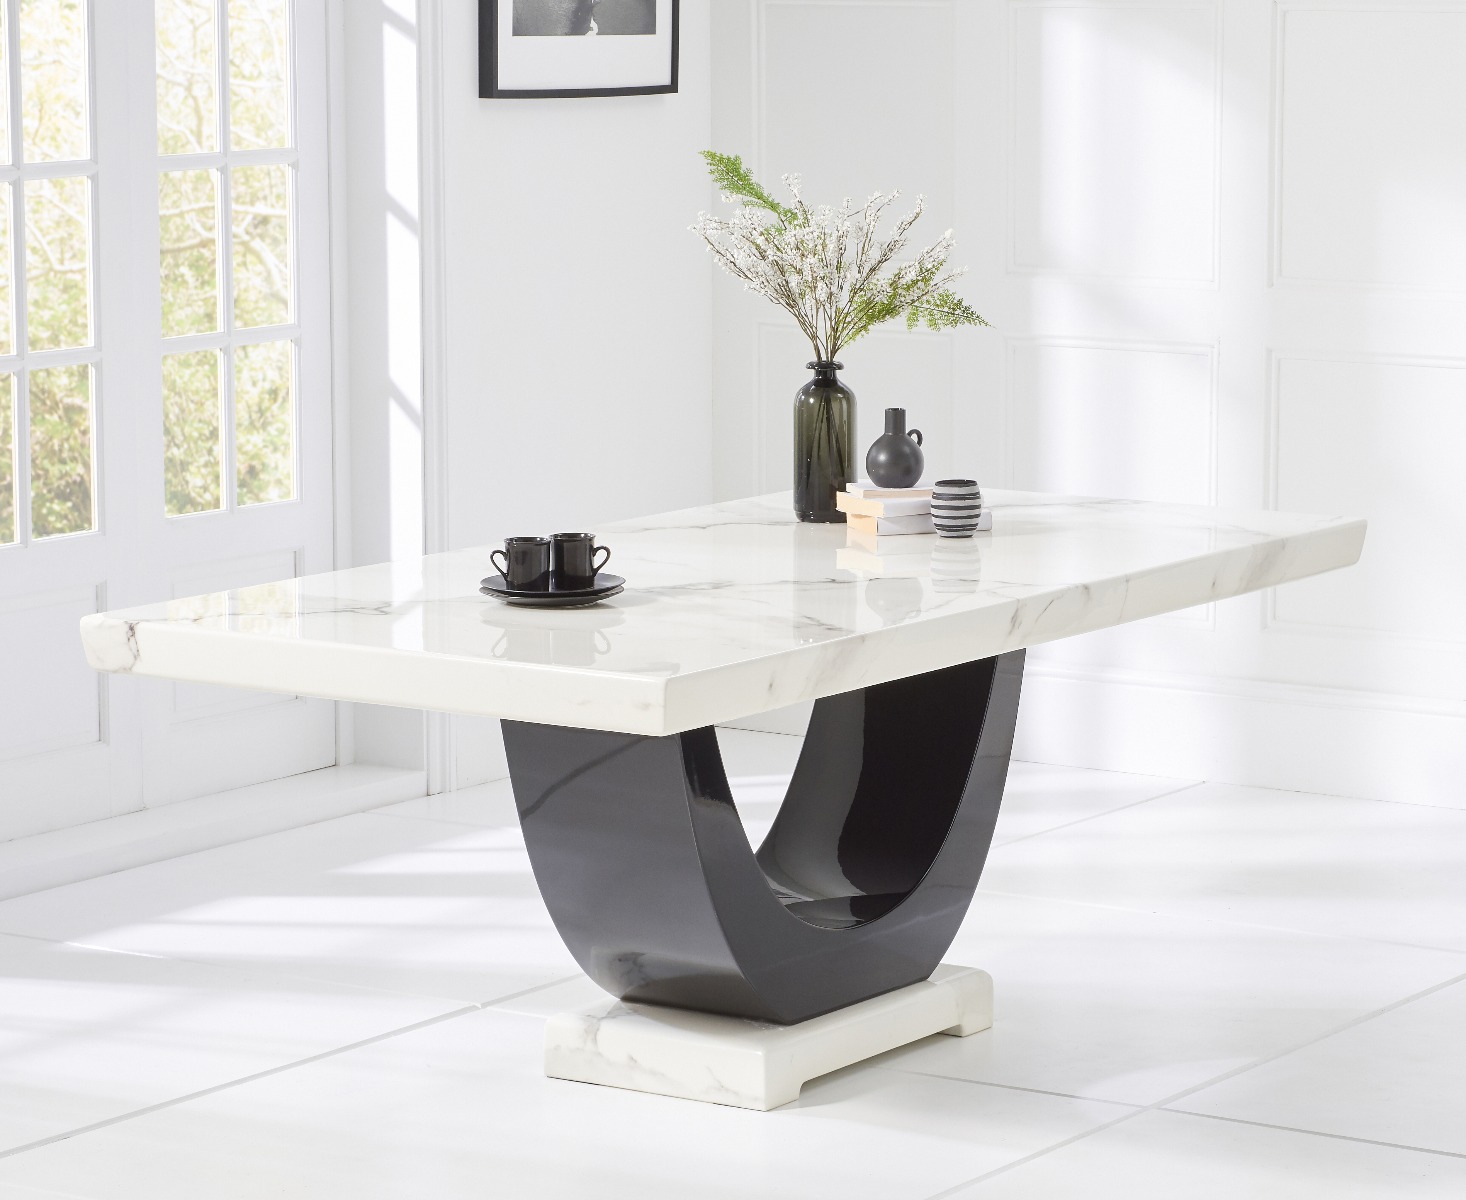 Photo 4 of Raphael 200cm white and black pedestal marble dining table with 12 grey francesca chairs